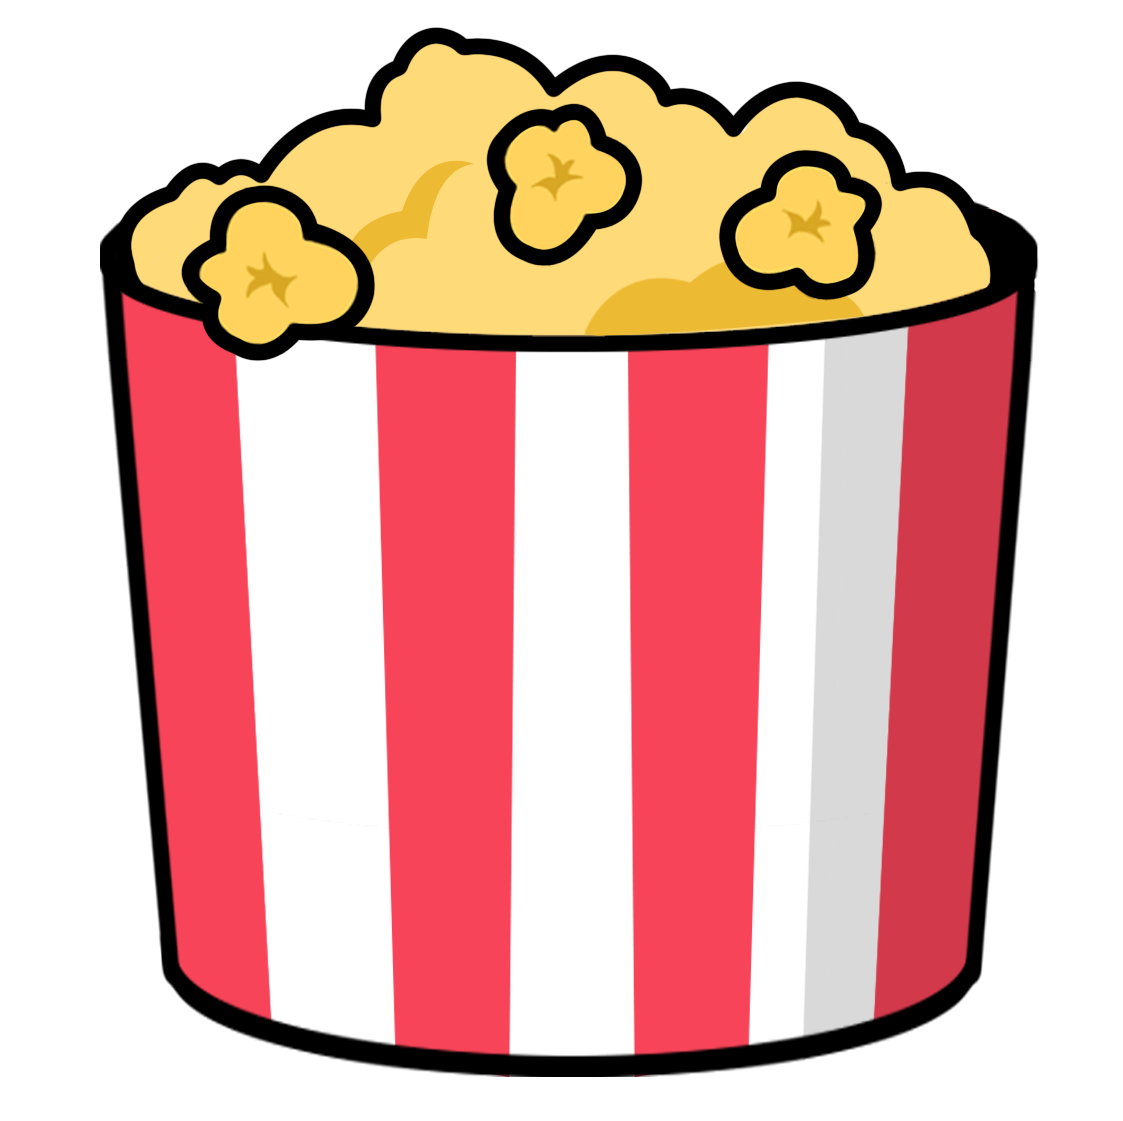 You can use cartoon popcorn clip art on your movie projects, school projects, blogs, e-books, etc. Use this clip art for personal or commercial purposes.